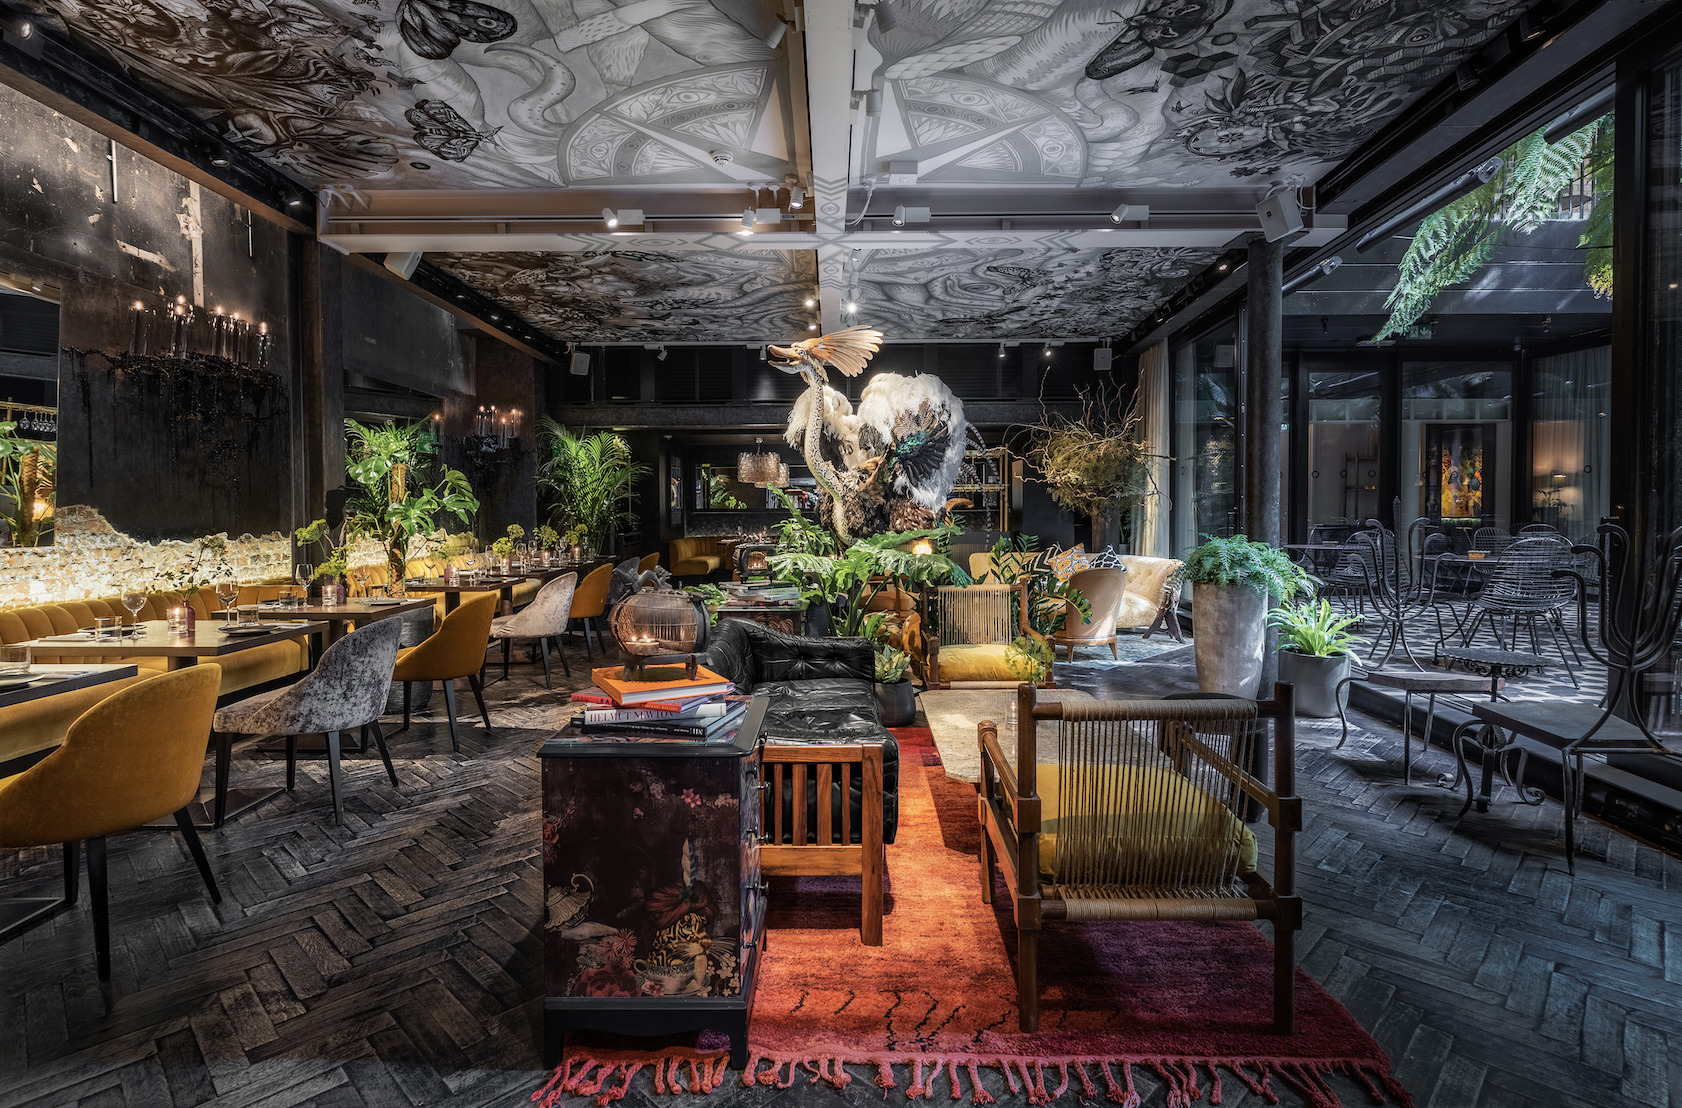 Luxuria Lifestyle's Danielle Tobin is invited to review YOPO at The Mandrake in London